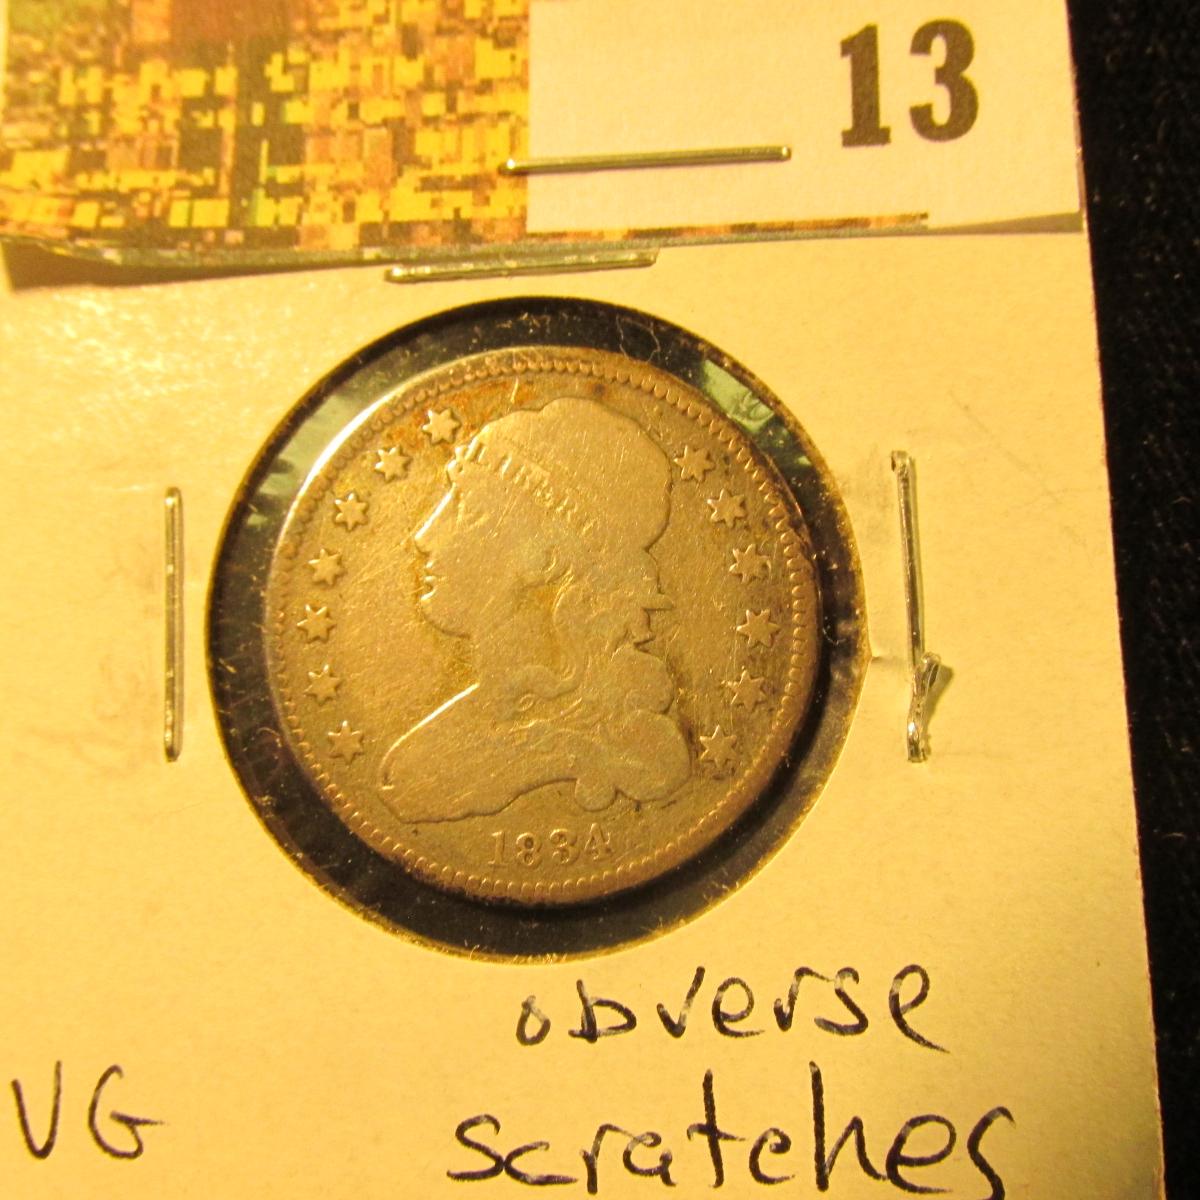 1834 Small size Capped Bust Quarter, VG, obverse scratches.